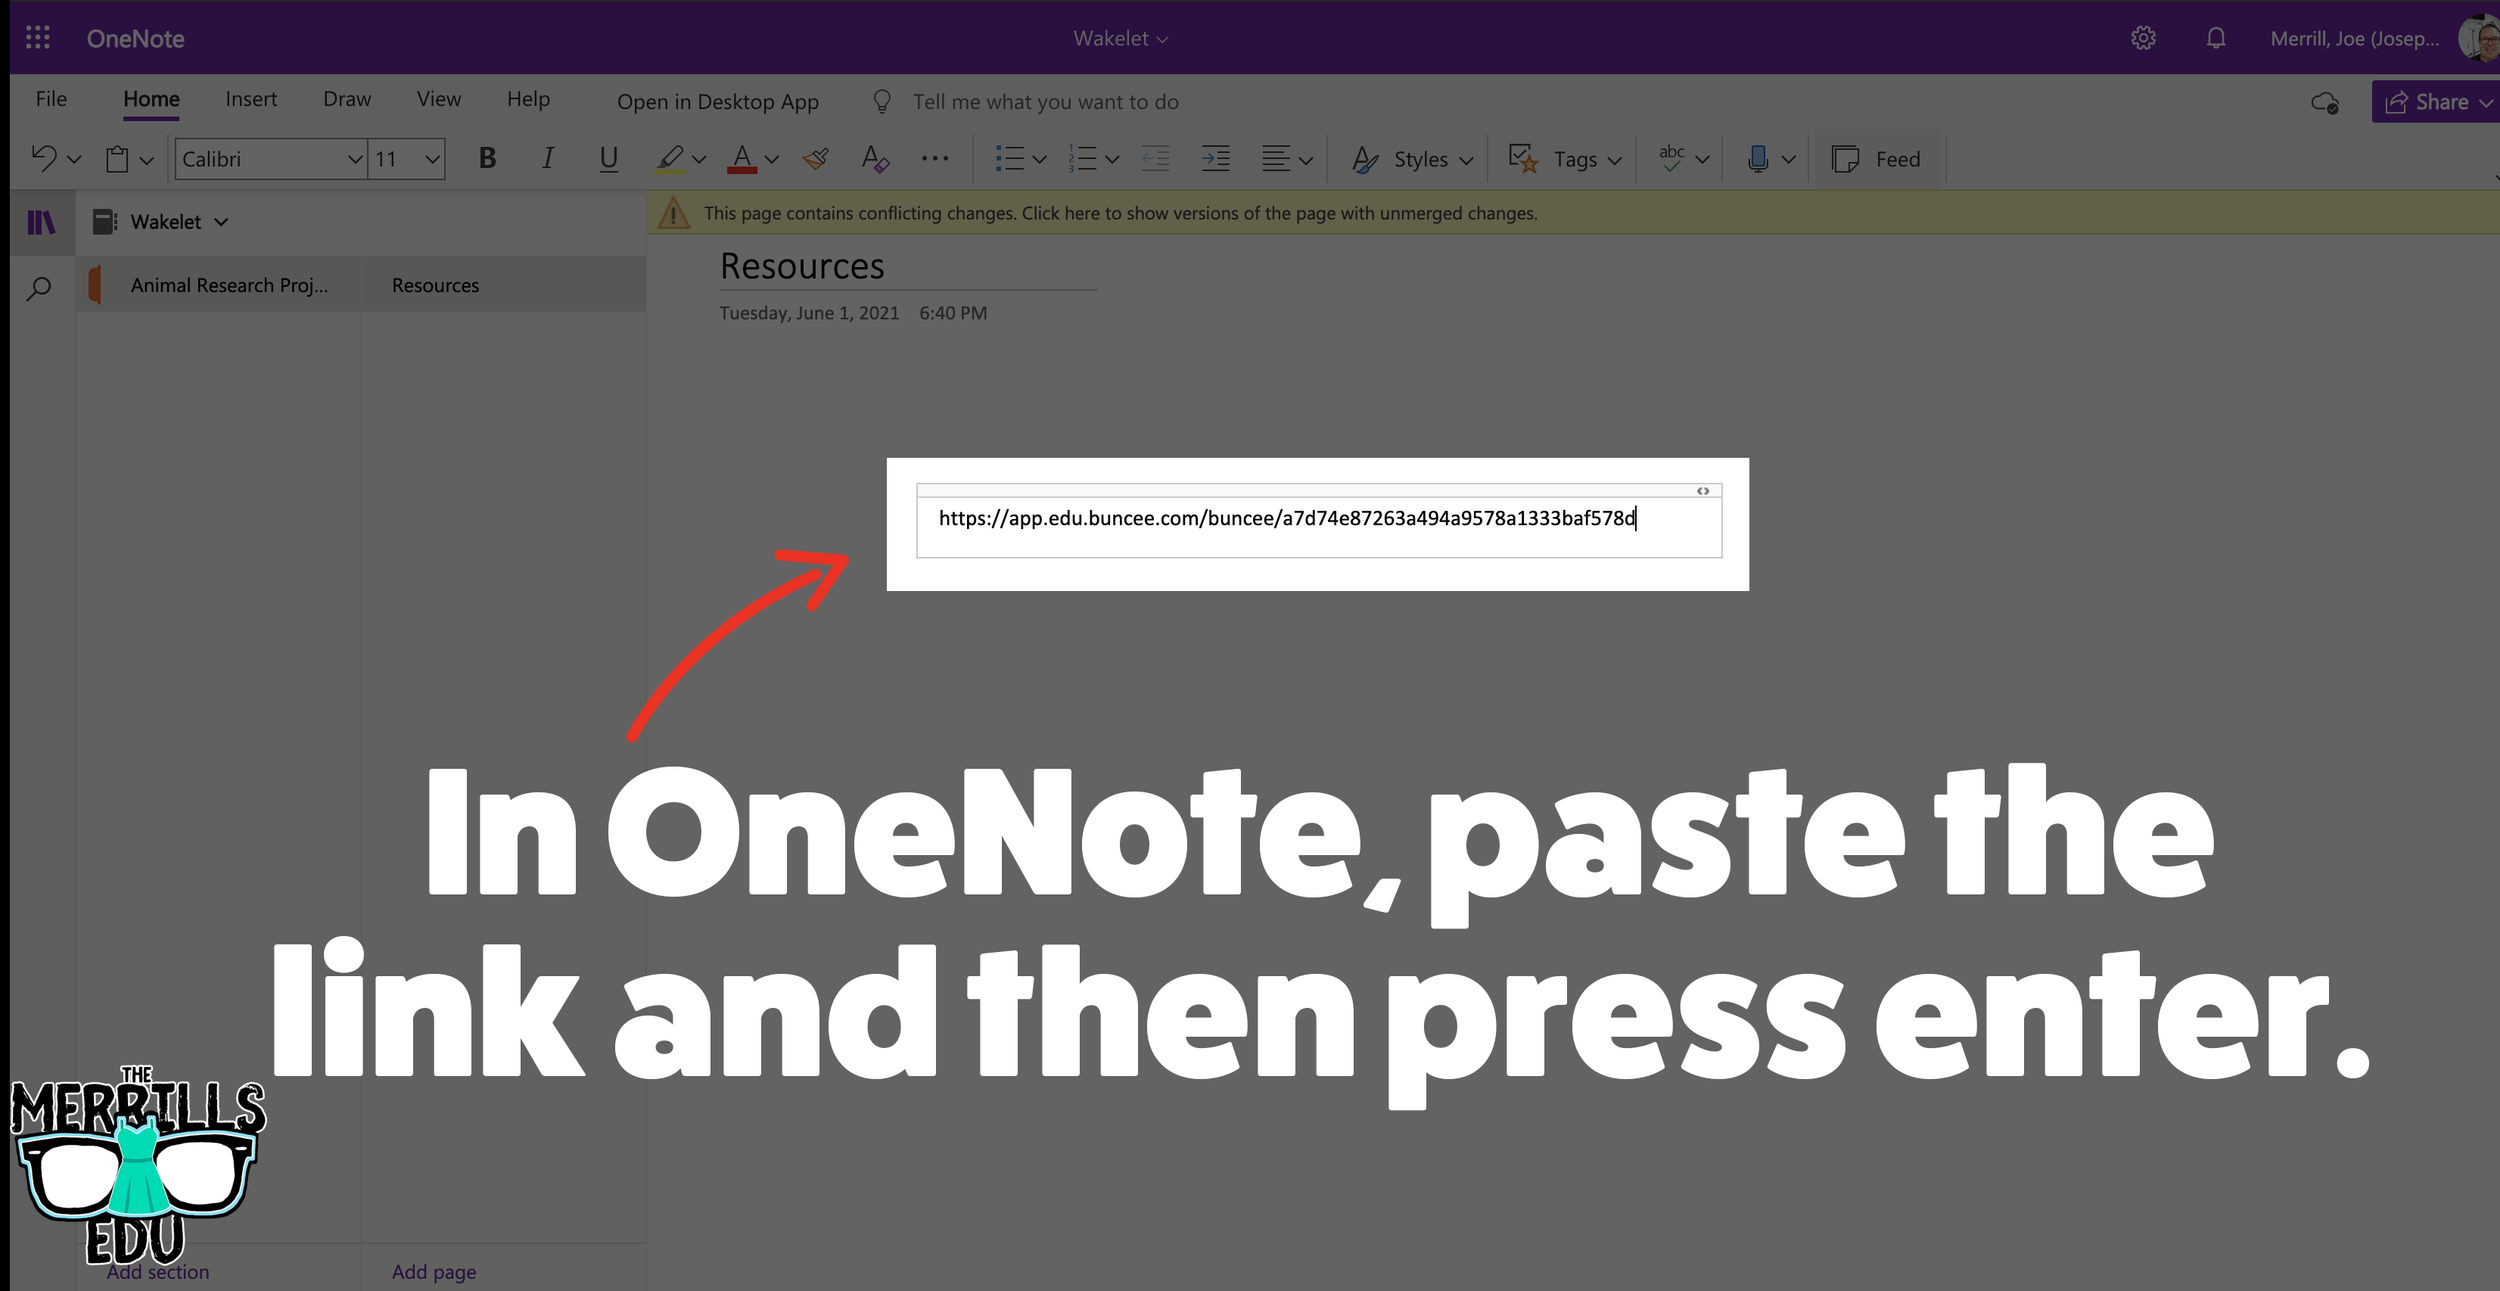 Buncee_Embedded_into_OneNote_4.png